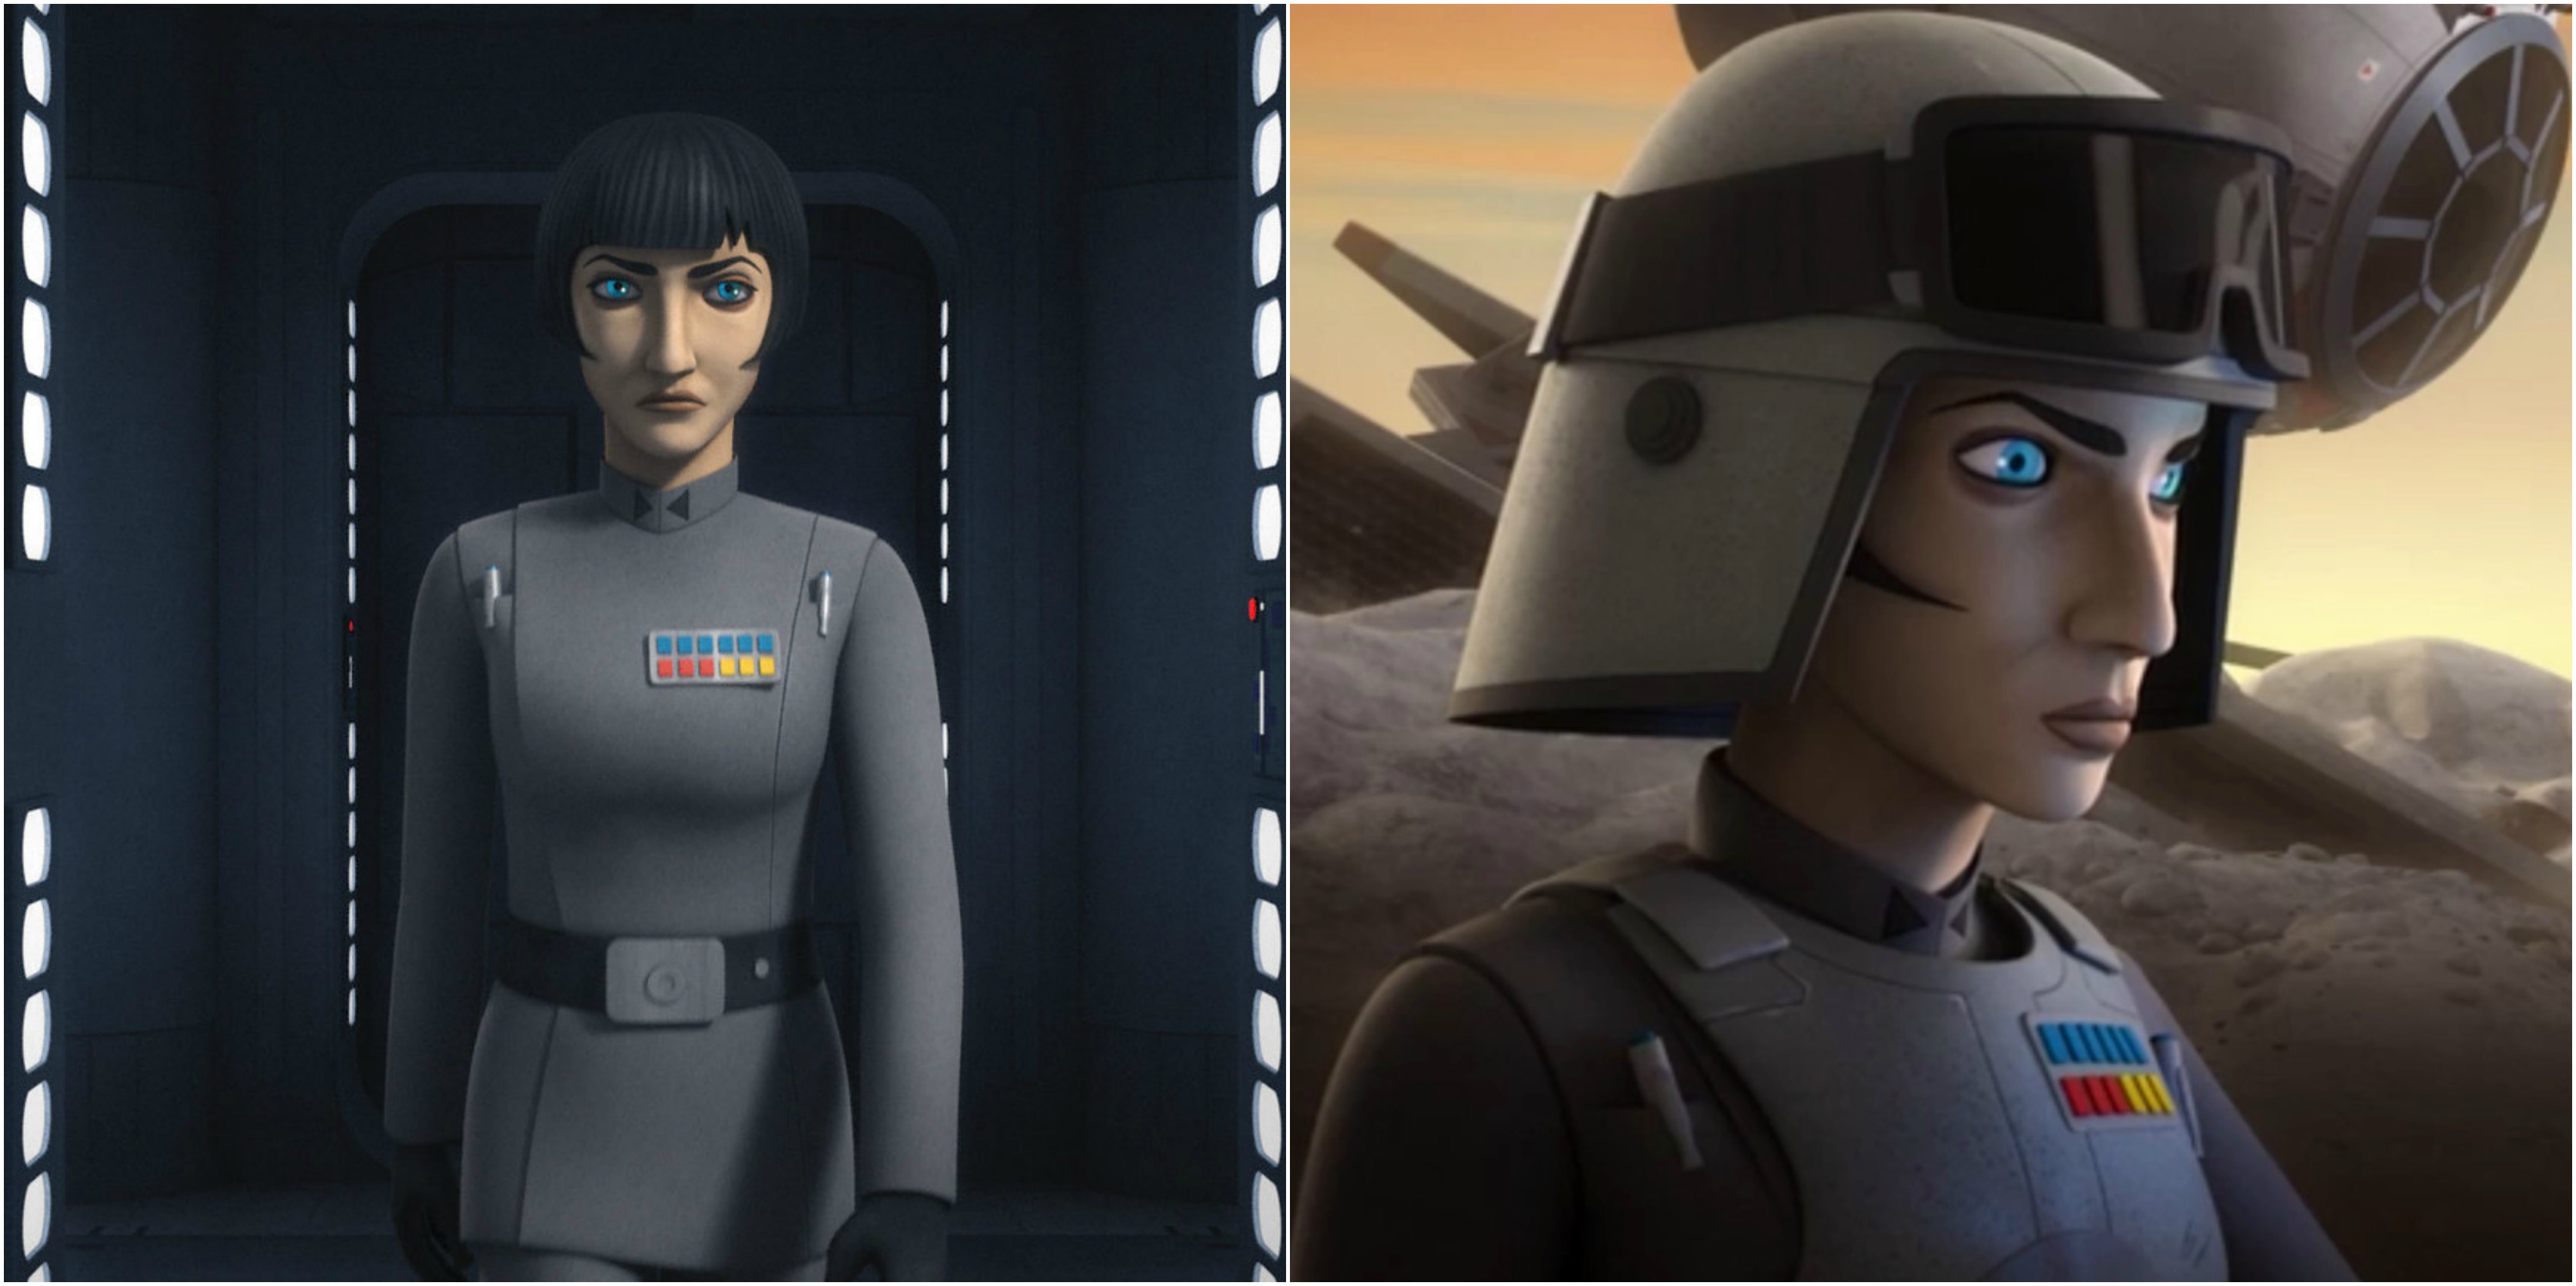 Arihnda Pryce was the Governor of the Lothal sector for the Galactic Empire...